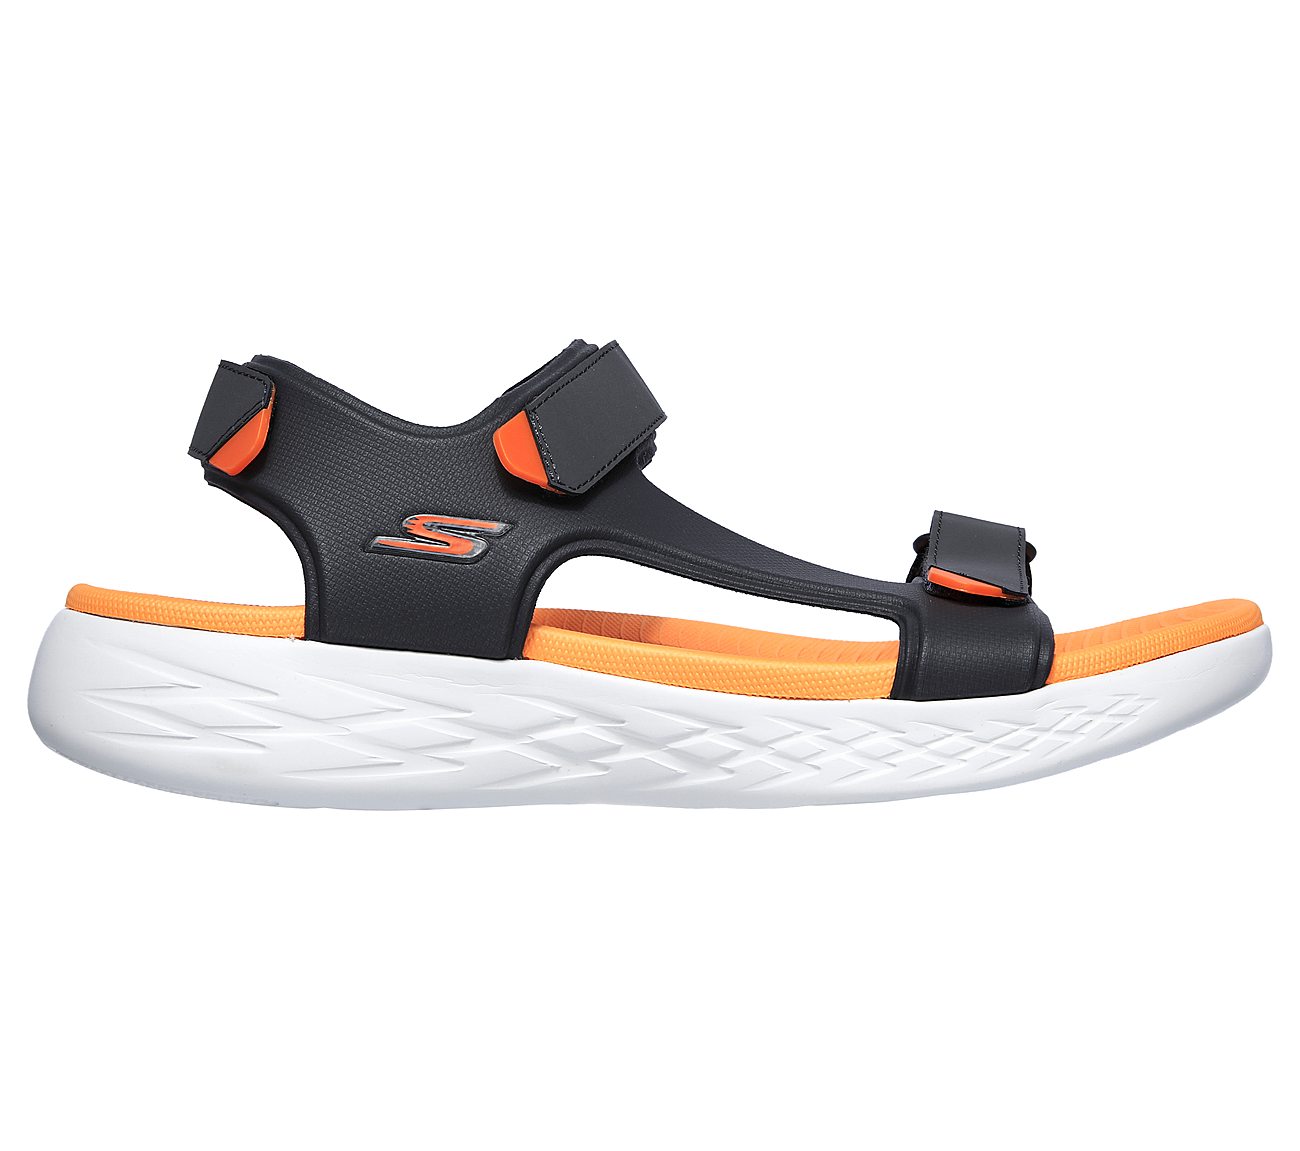 ON-THE-GO 600 - VENTURE, CHARCOAL/ORANGE Footwear Right View